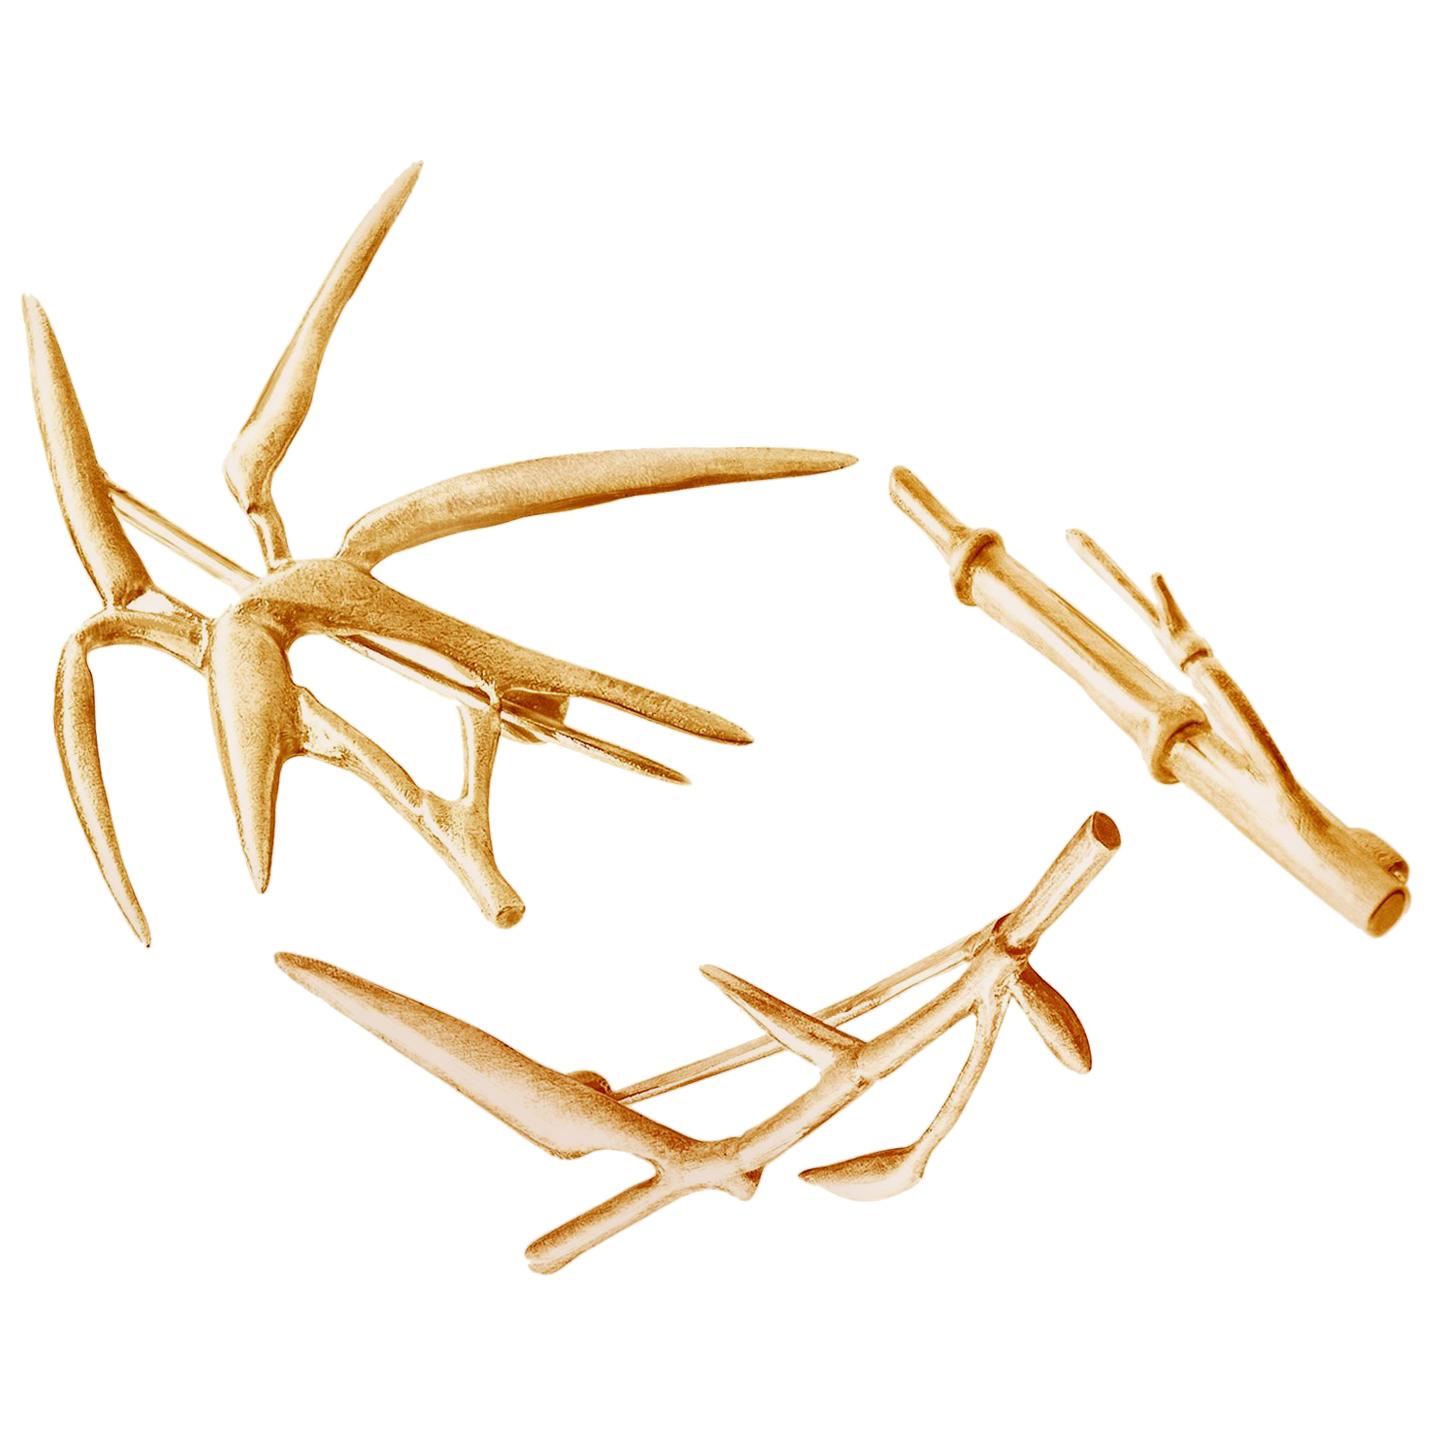 Featured in Vogue Designer Rose Gold Contemporary Bamboo Brooches Triptych For Sale